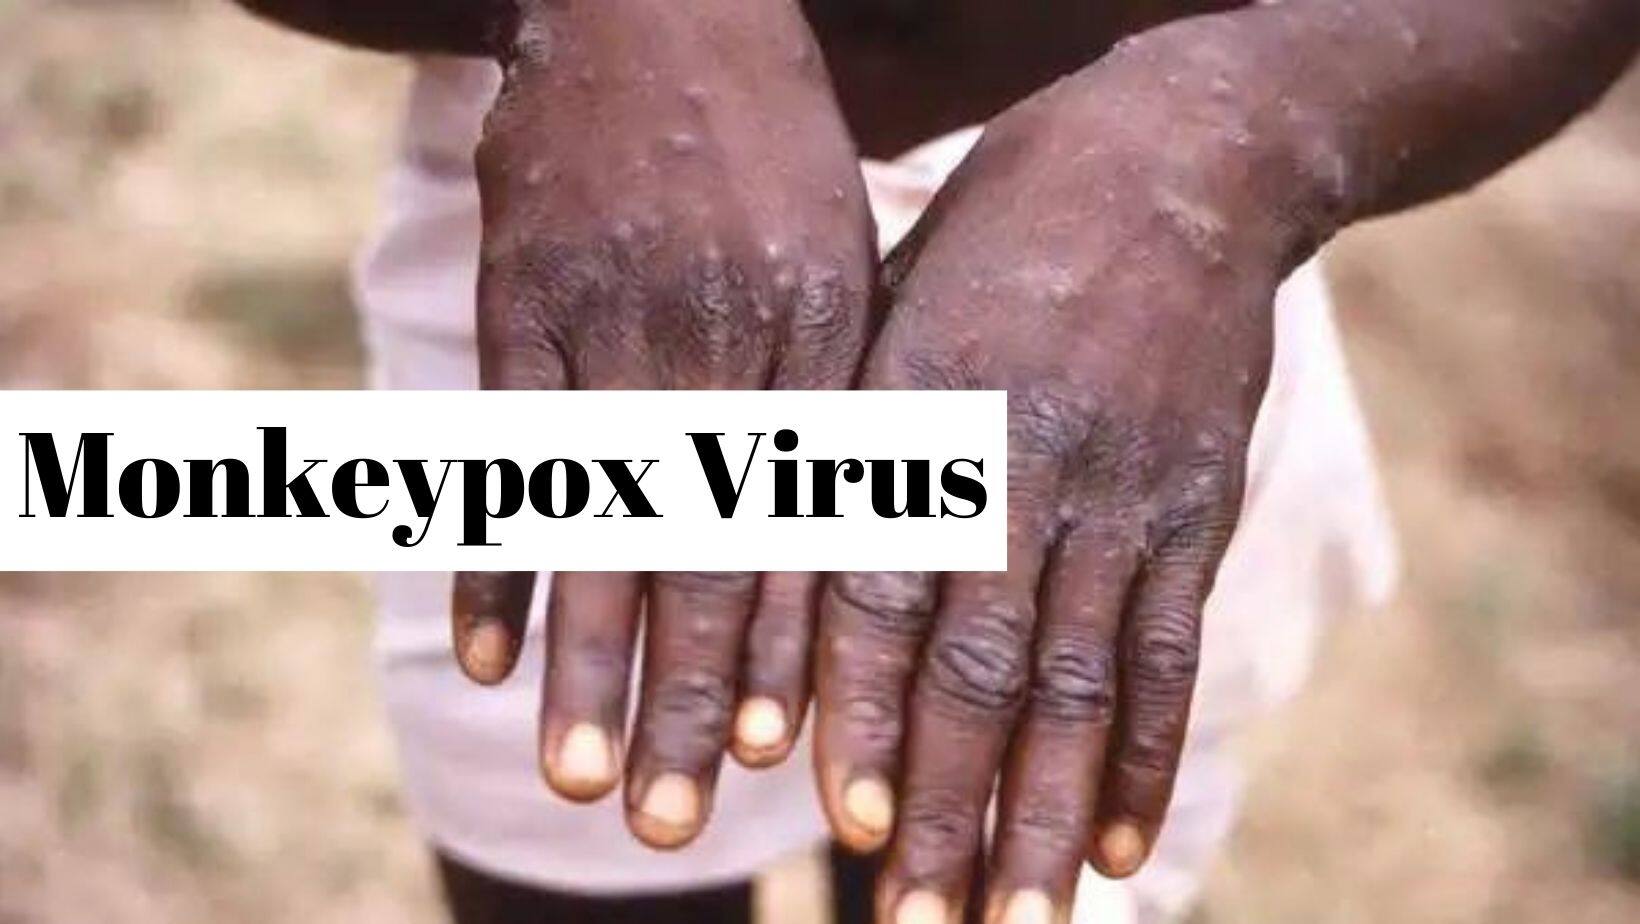 Skin Lesions, Low Fever: New Symptoms Of Monkeypox Found In Infected Patients In The UK